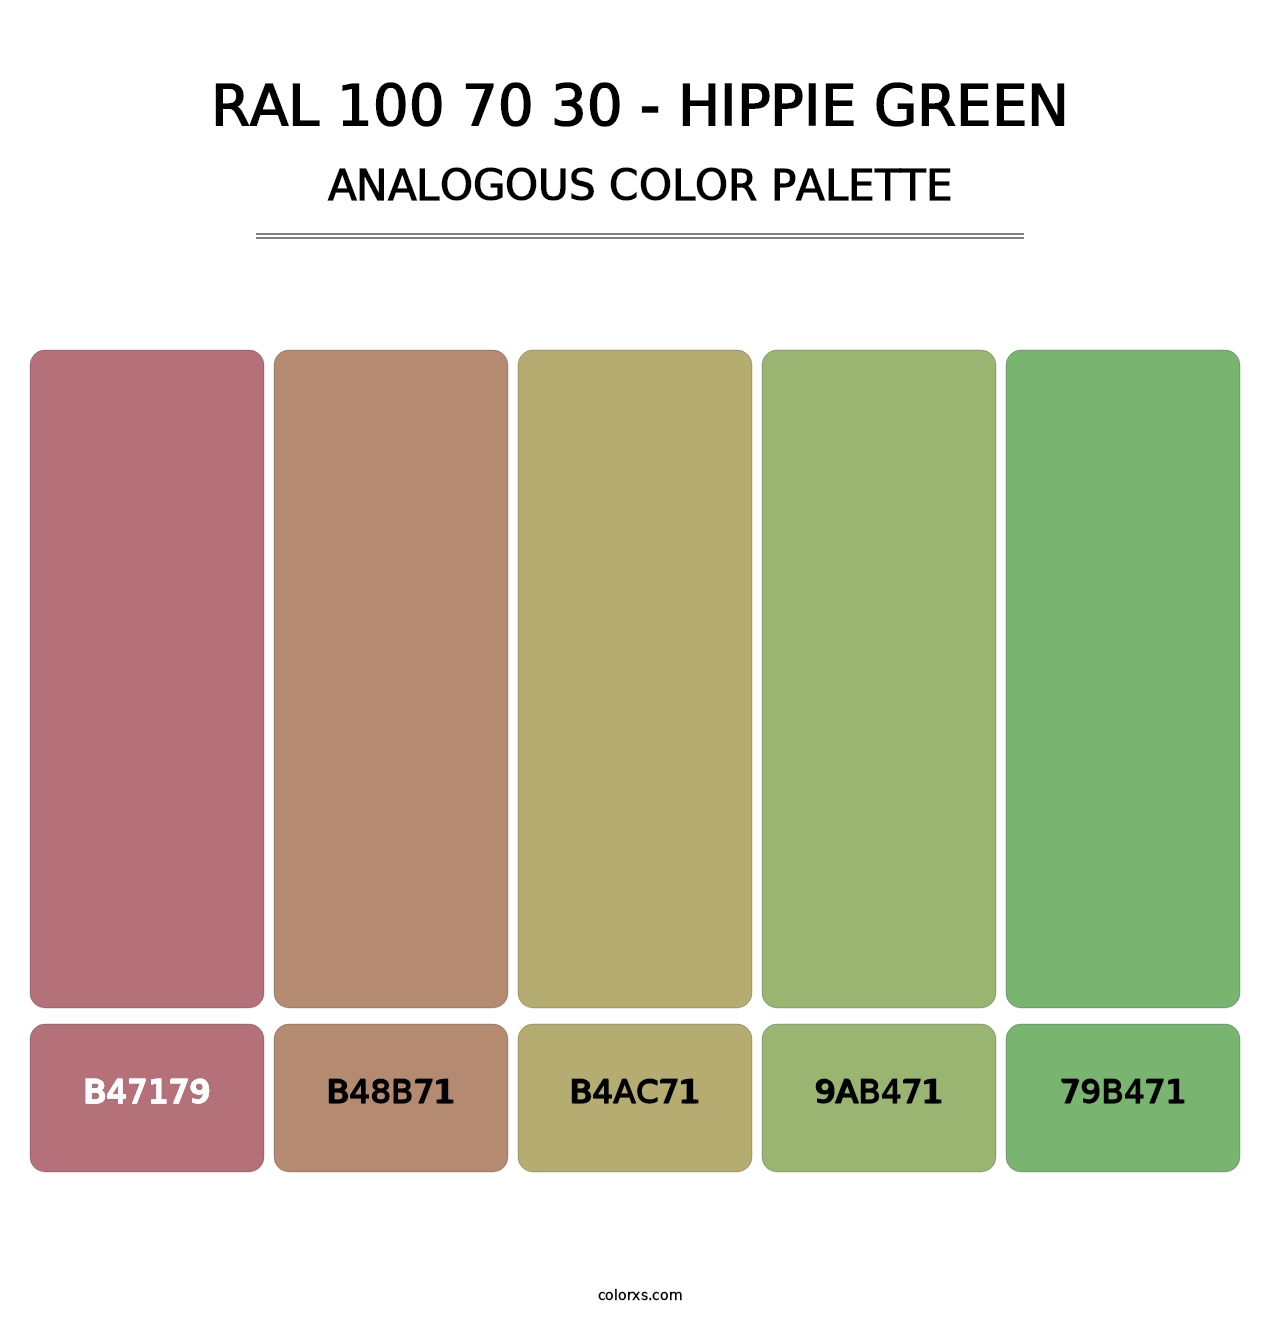 RAL 100 70 30 - Hippie Green - Analogous Color Palette